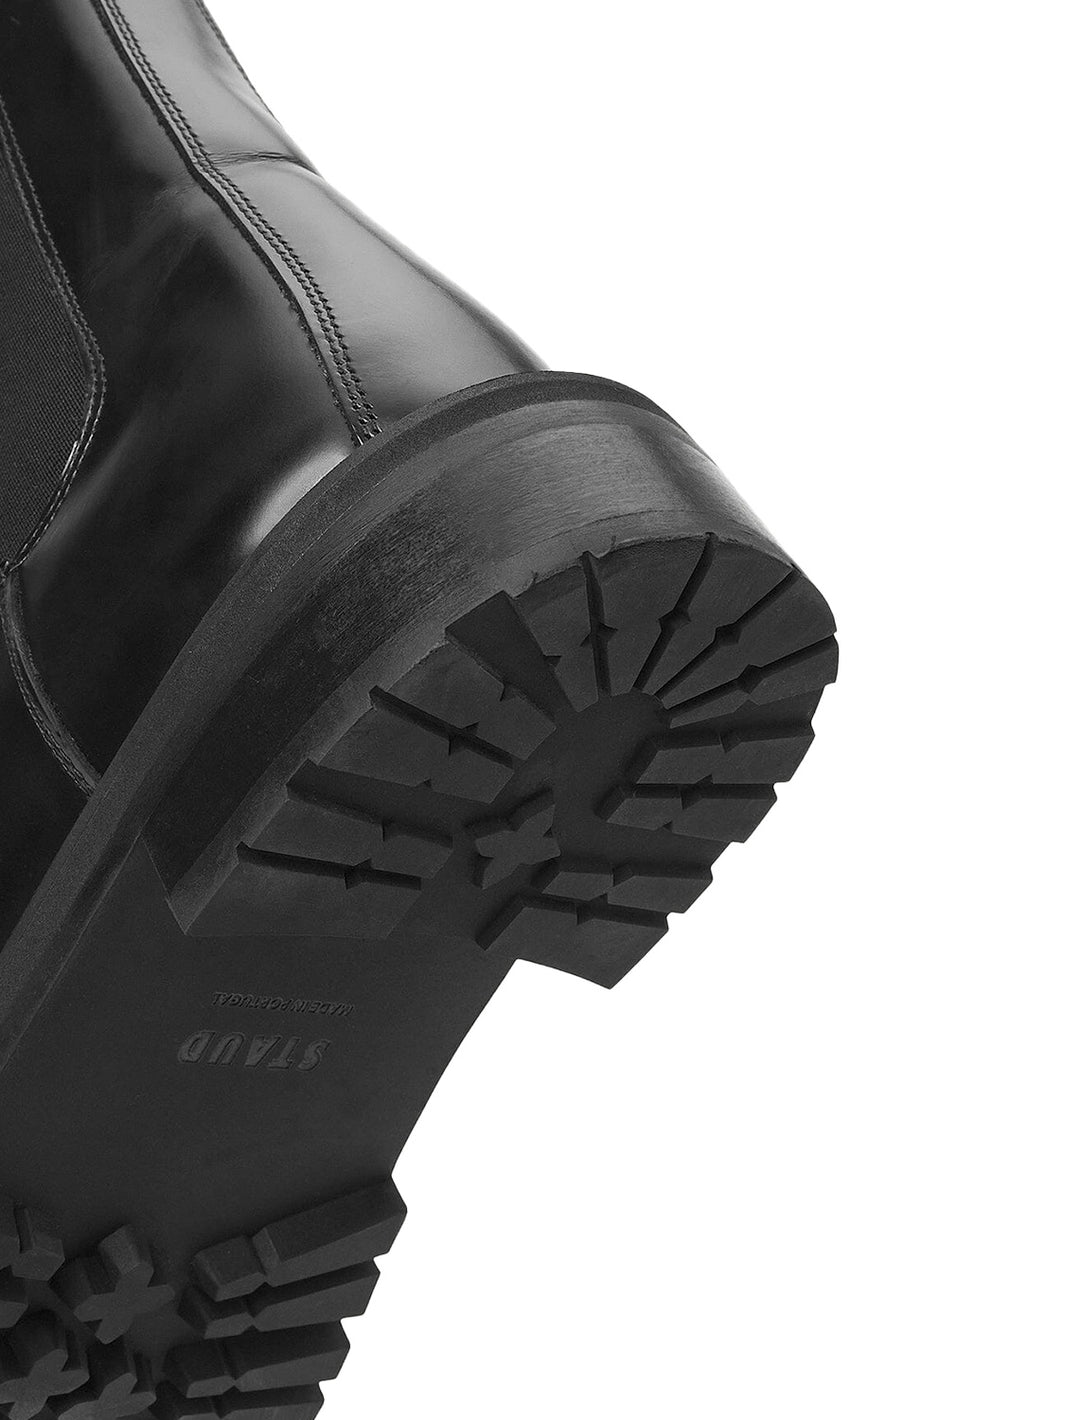 Close-up view of Staud's dutch boot in black.